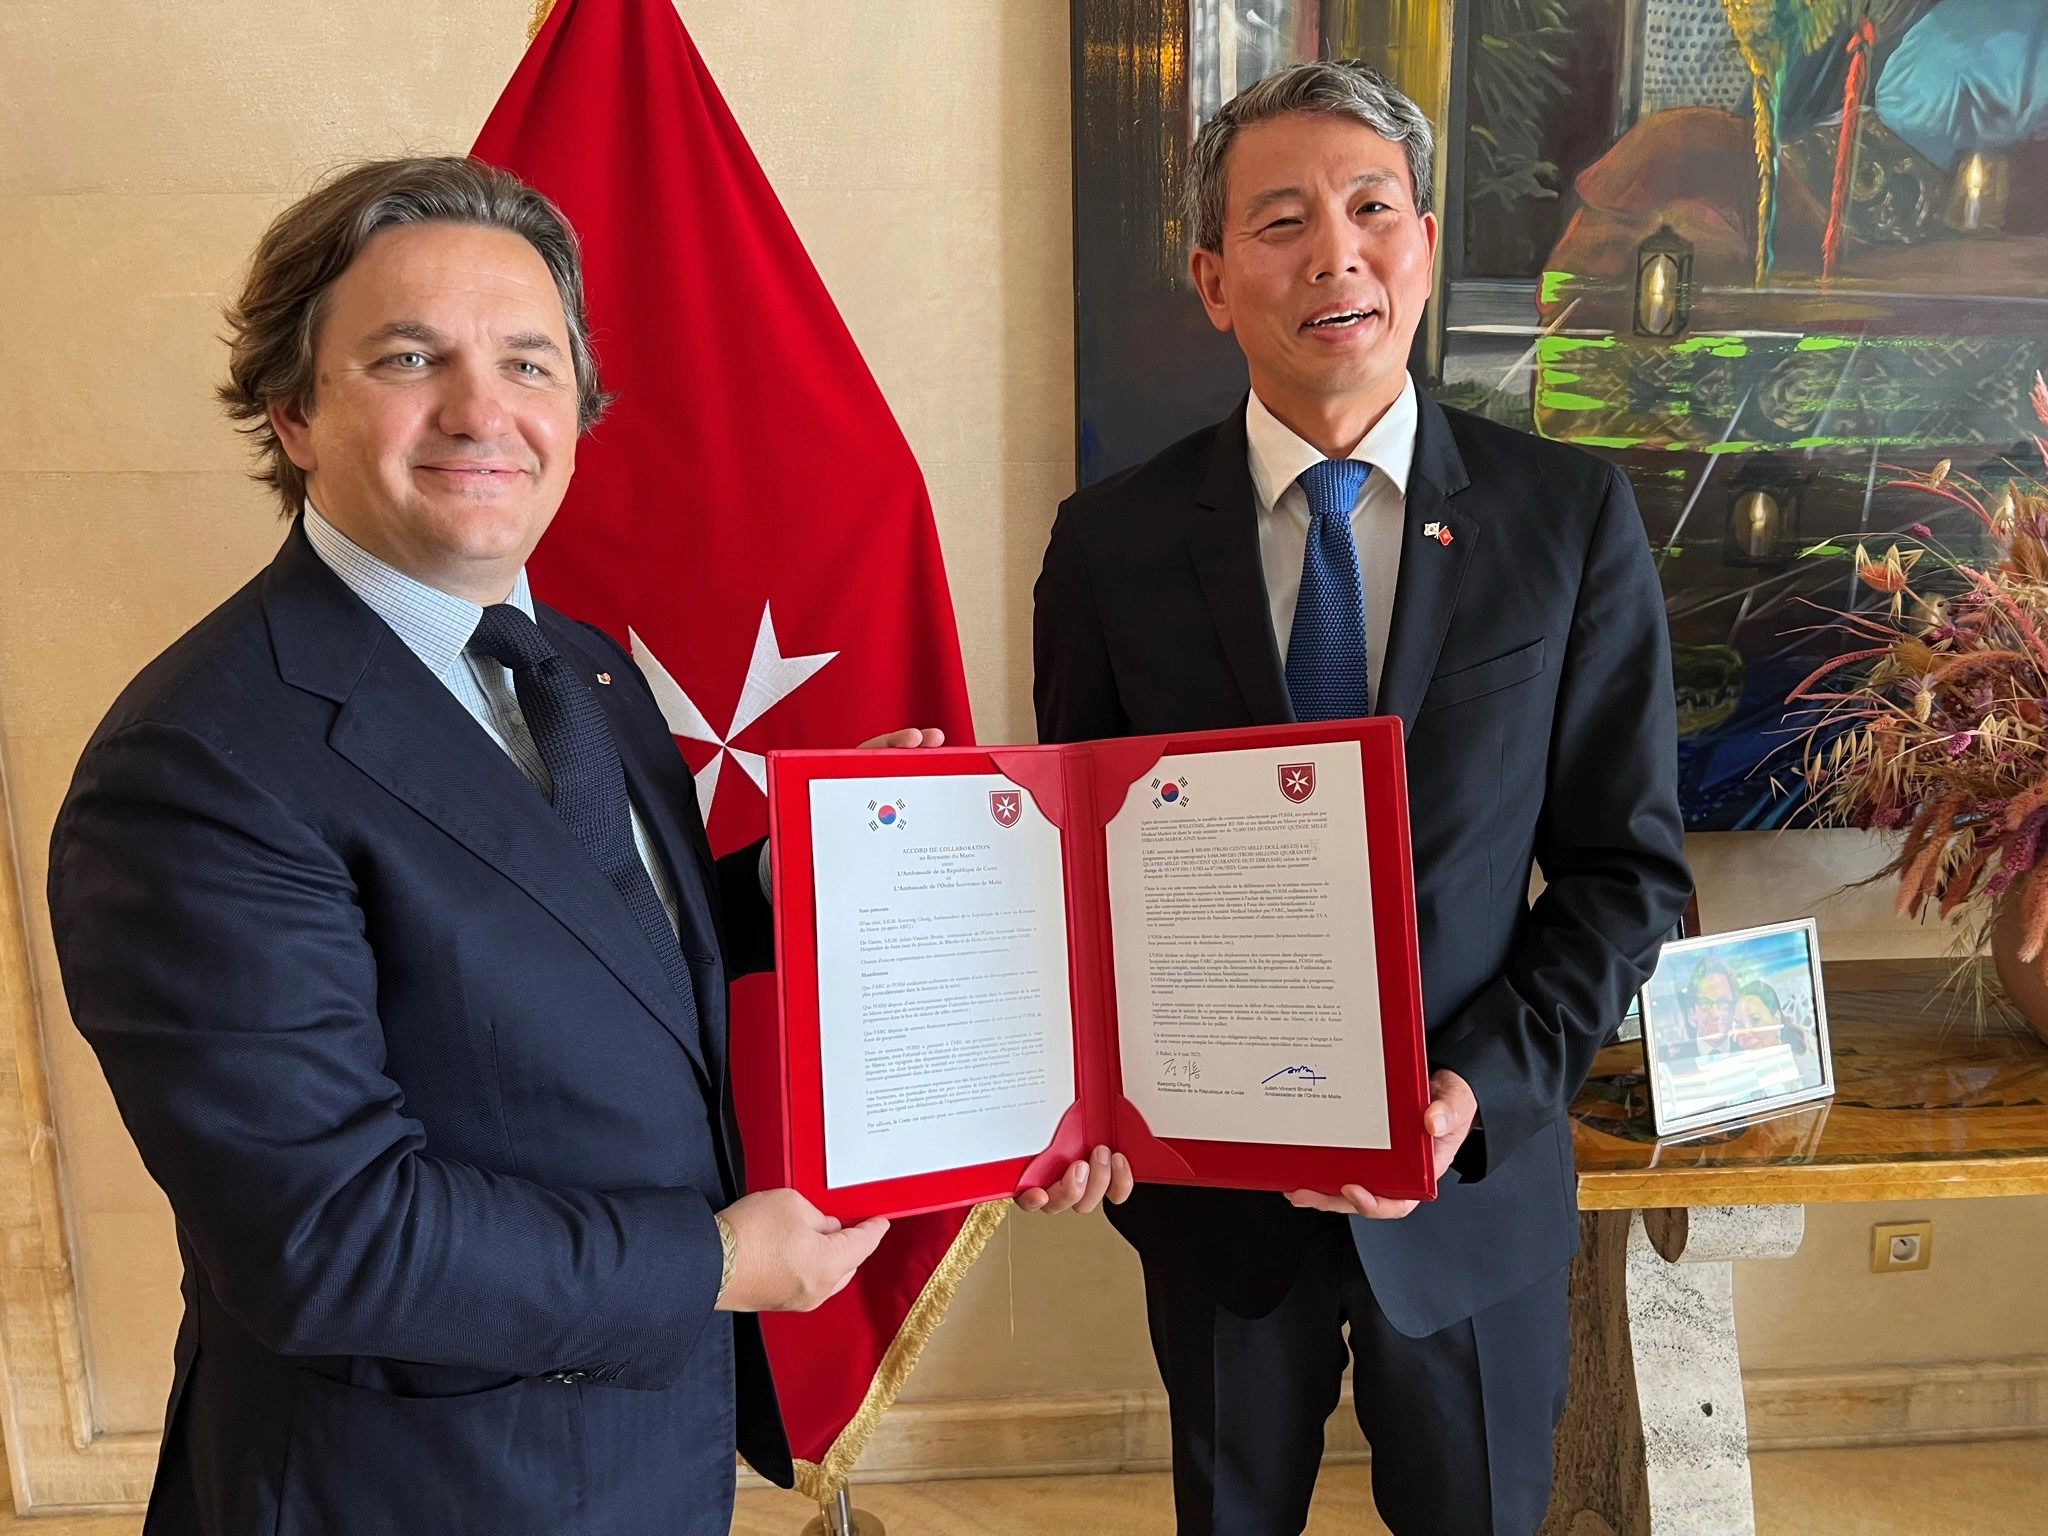 The Order of Malta annonced the imminent arrival of 47 incubators to be distributed throughout Morocco